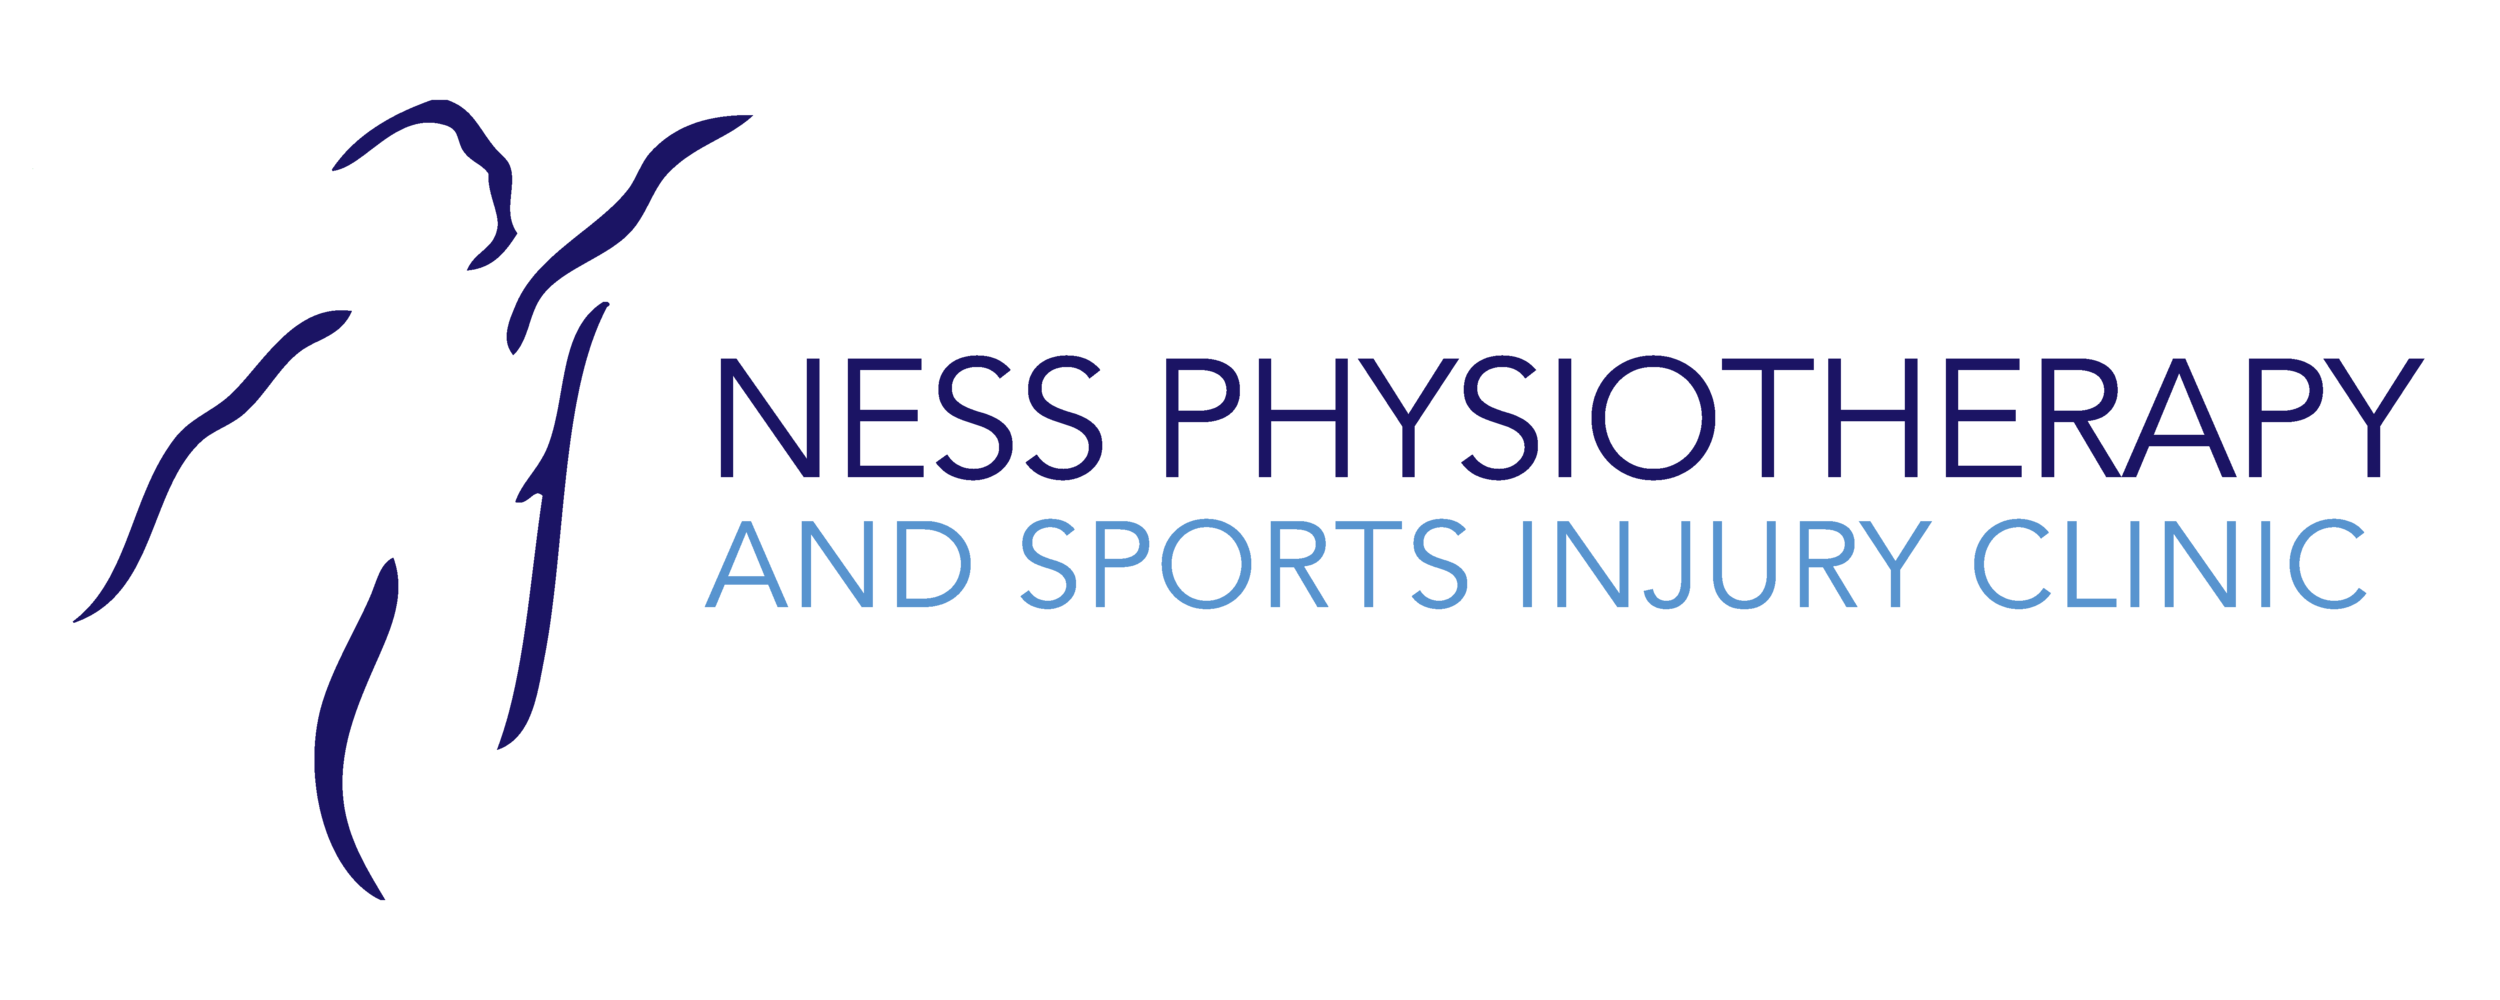 Ness Physiotherapy and Sports Injury Clinic